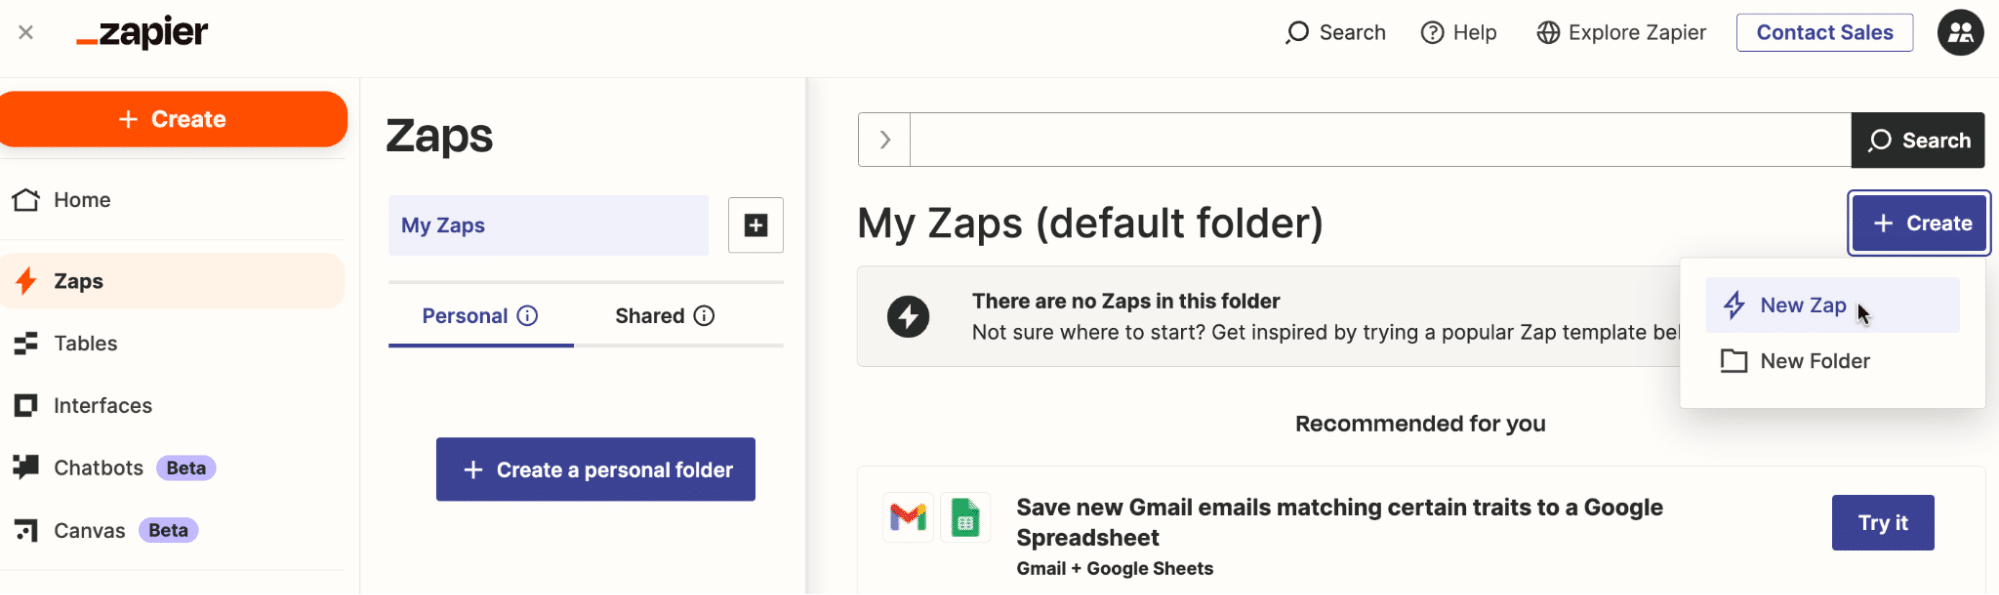 Creating a new Zap with Chargebee as the trigger app in Zapier